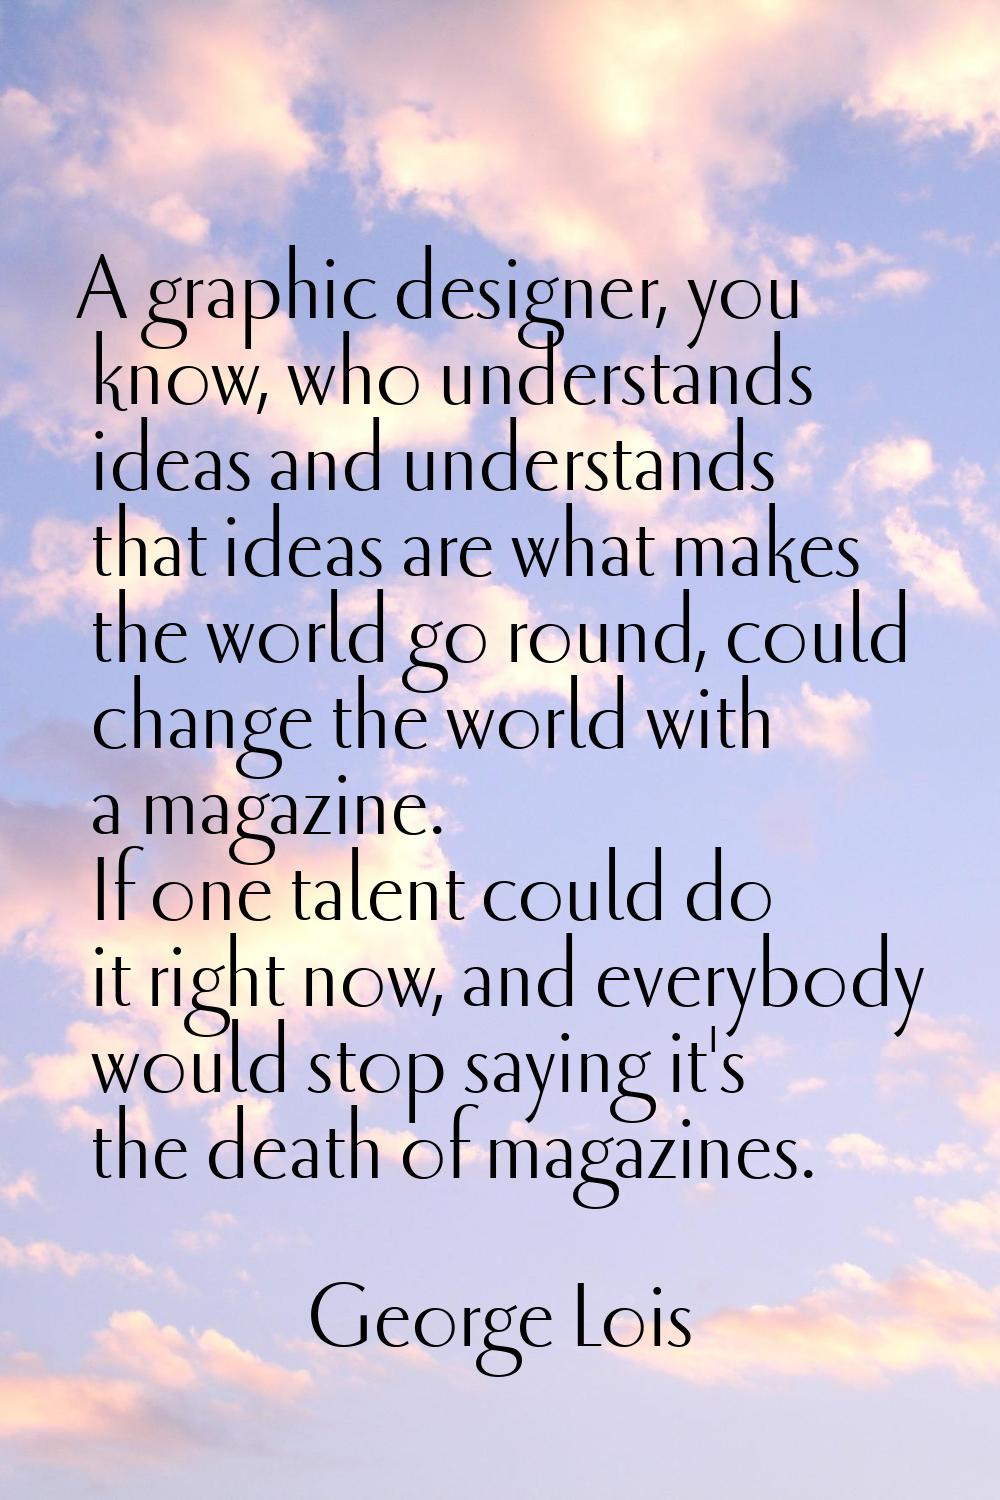 A graphic designer, you know, who understands ideas and understands that ideas are what makes the w